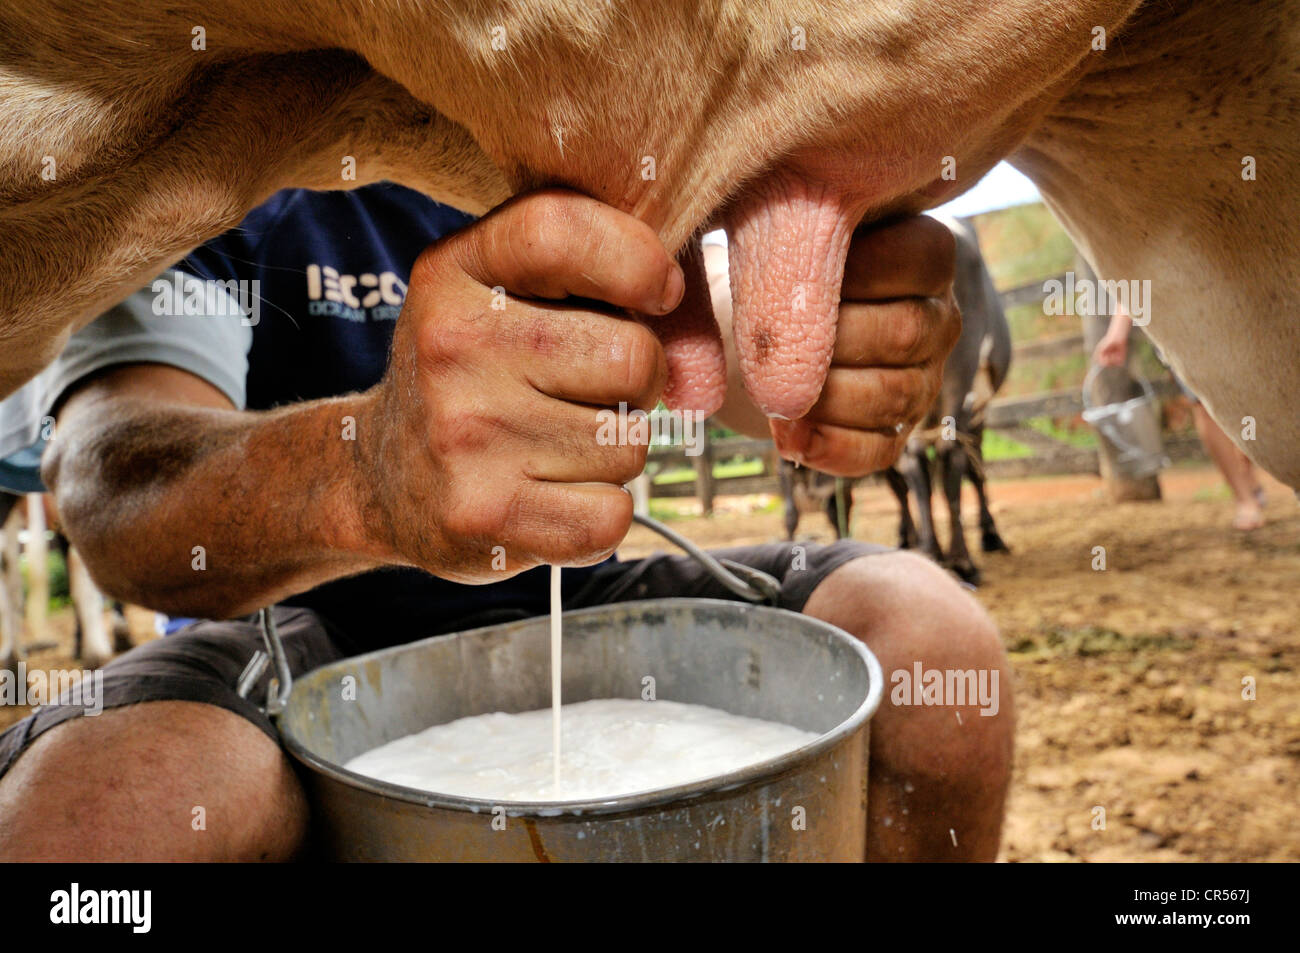 Man milking a cow by hand, settlement of the Movimento dos Trabalhadores Rurais sem Terra landless movement, MST Stock Photo